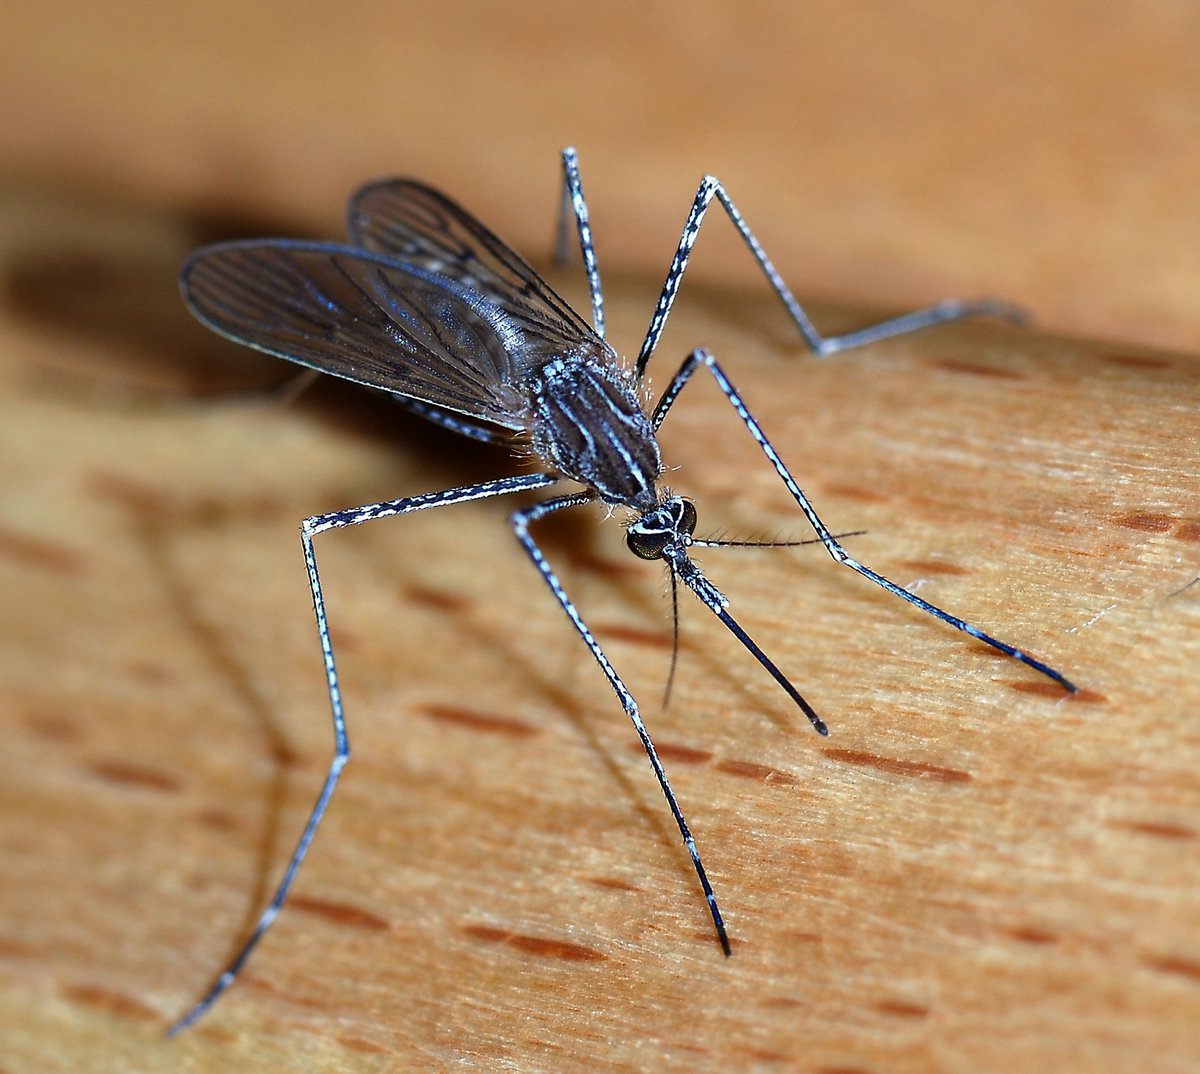 First, just to clarify, there is no one mosquito.there are more than 3500 species categorized into 112 genera that fall under the moniker of mosquito.Canada is home to ~82 species of mosquitos, some of which are zoophilic (animal-feeding) others anthropophilic (human-feeding)